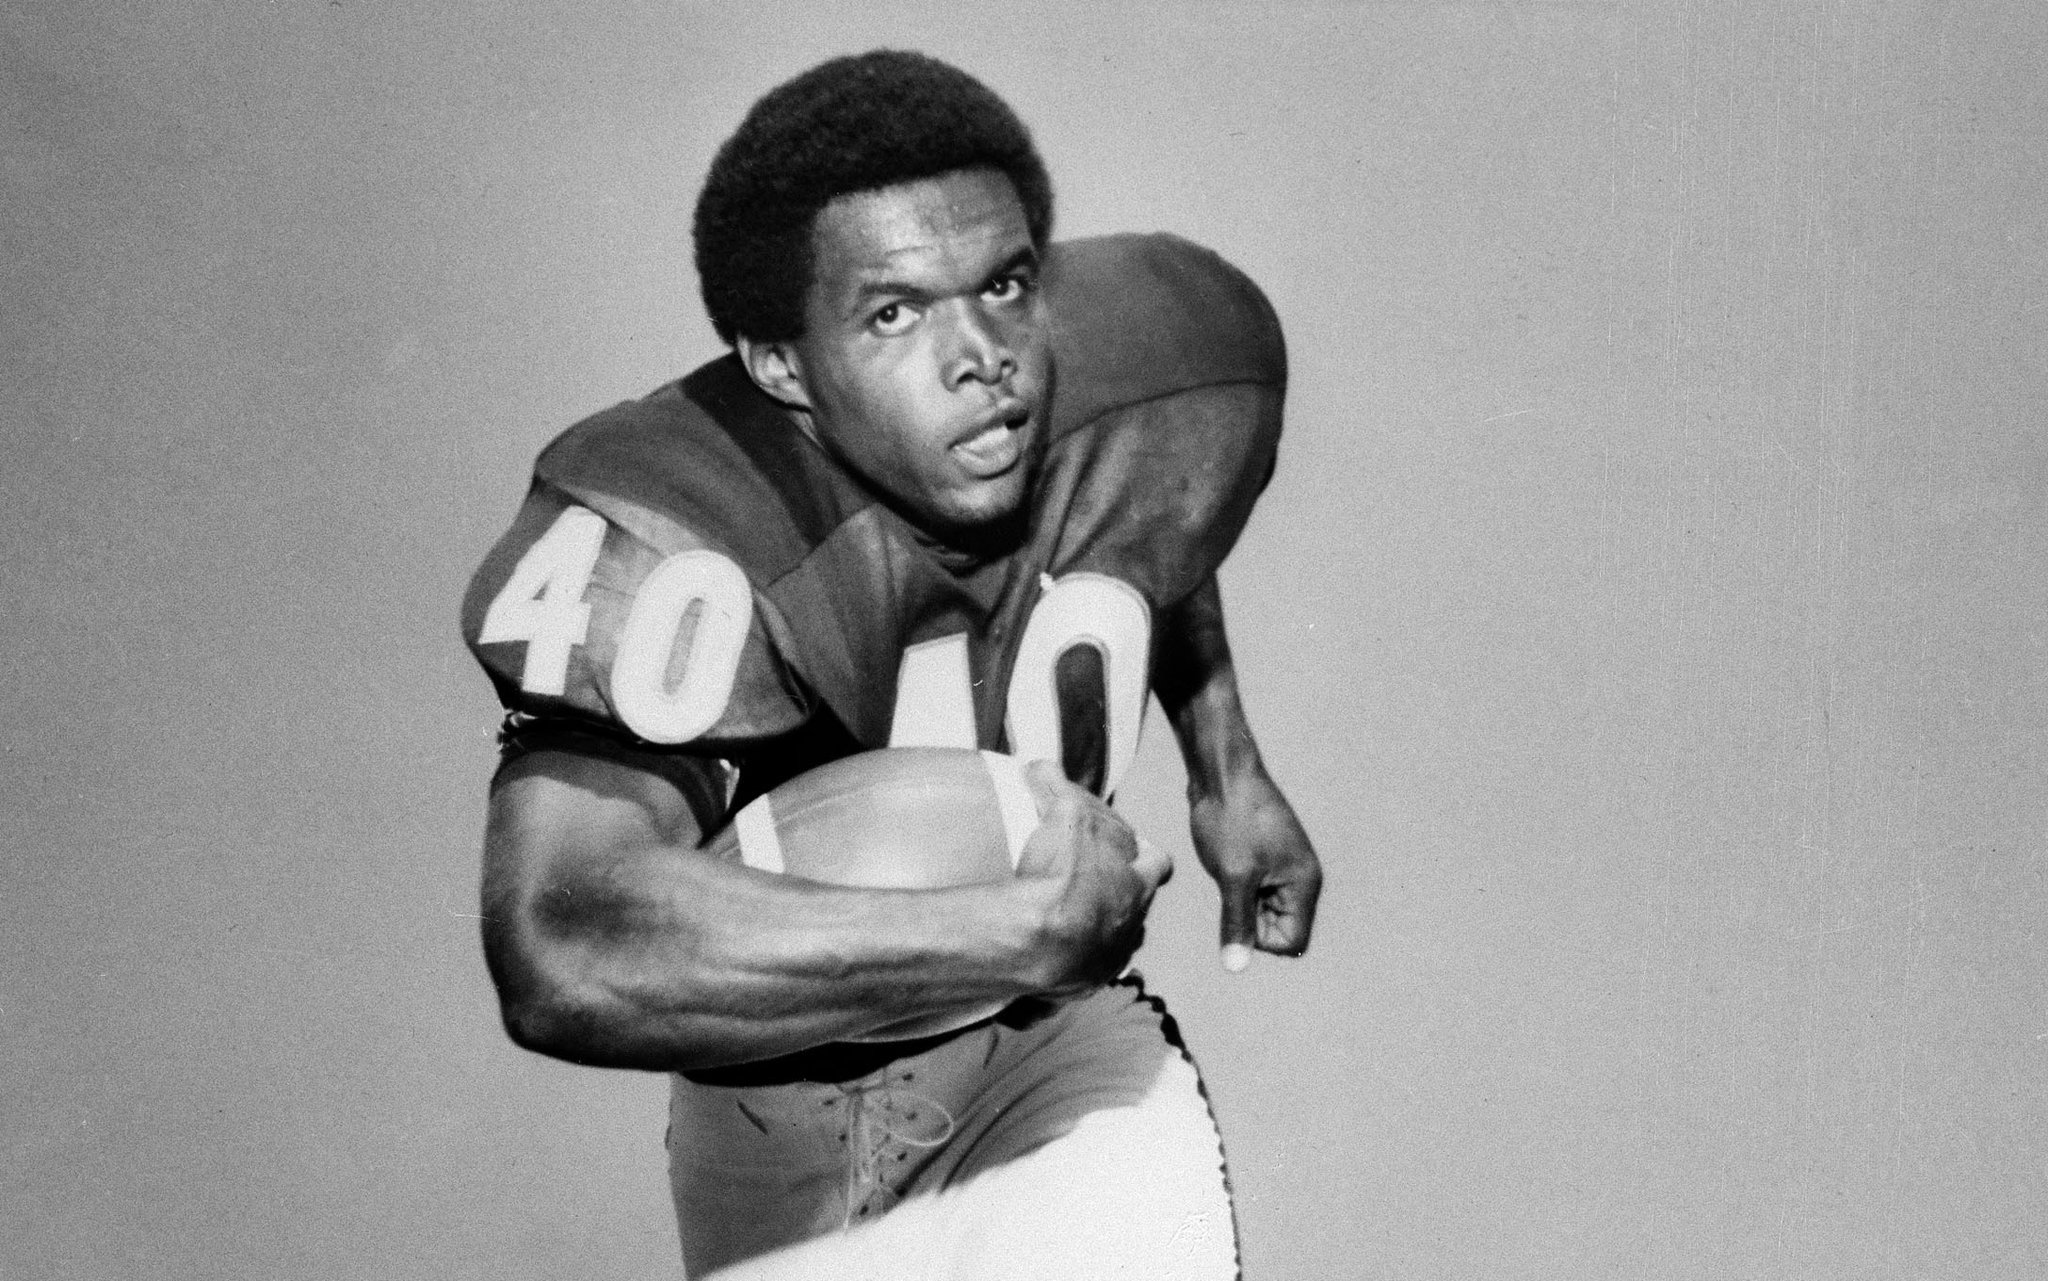 Chicago Bears’ Hall of Fame running back Gale Sayers dies at age 77